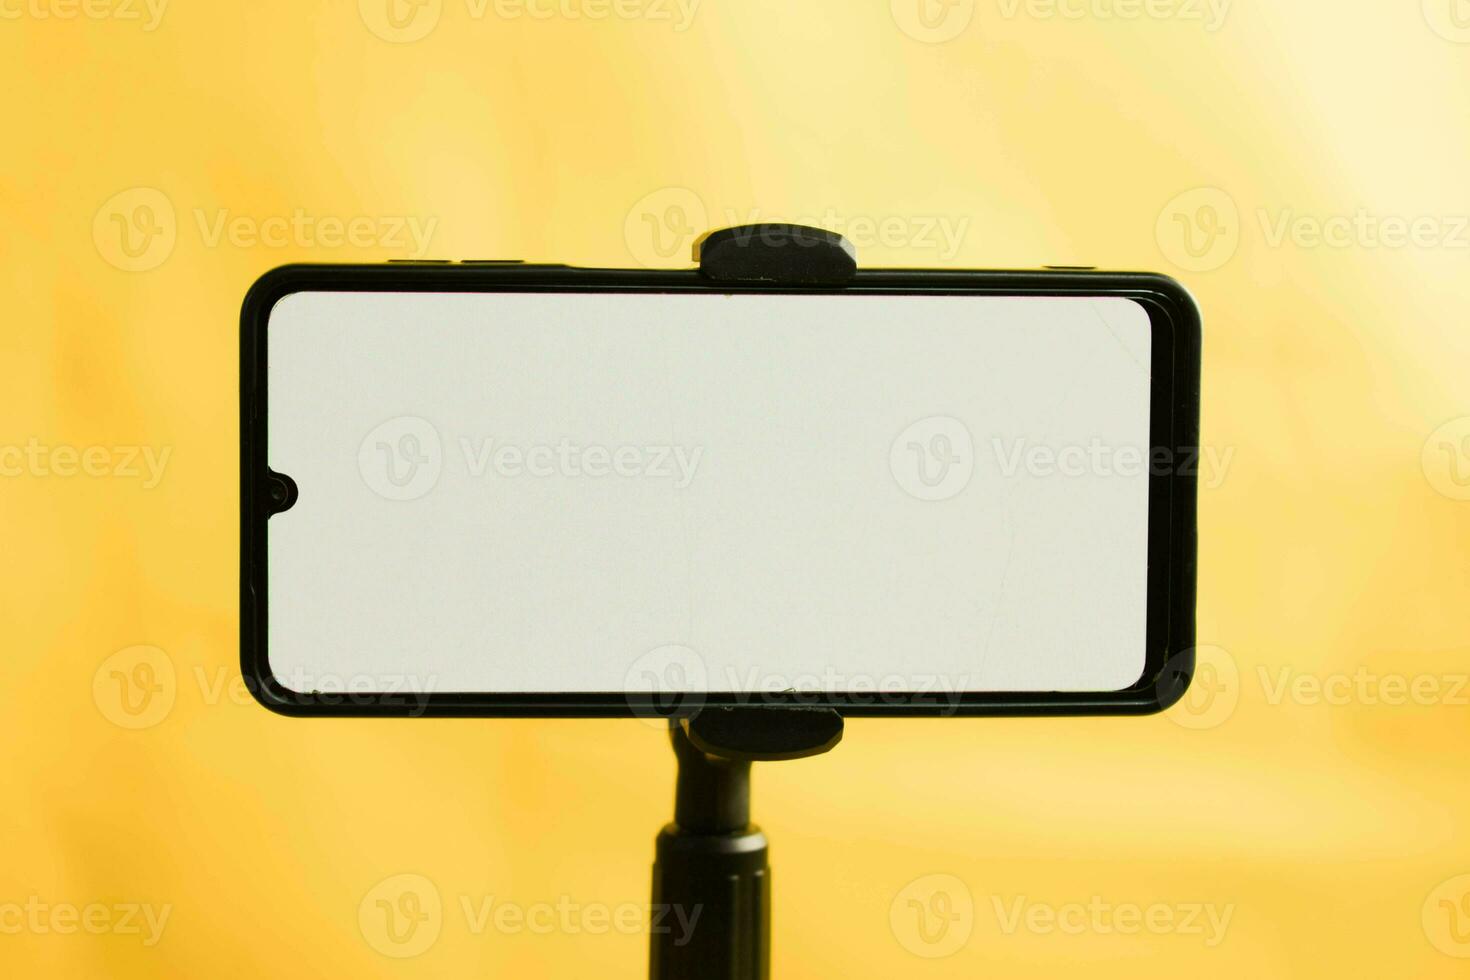 Landscape phone with white screen fixed to tripod on yellow background, for mockup design. photo